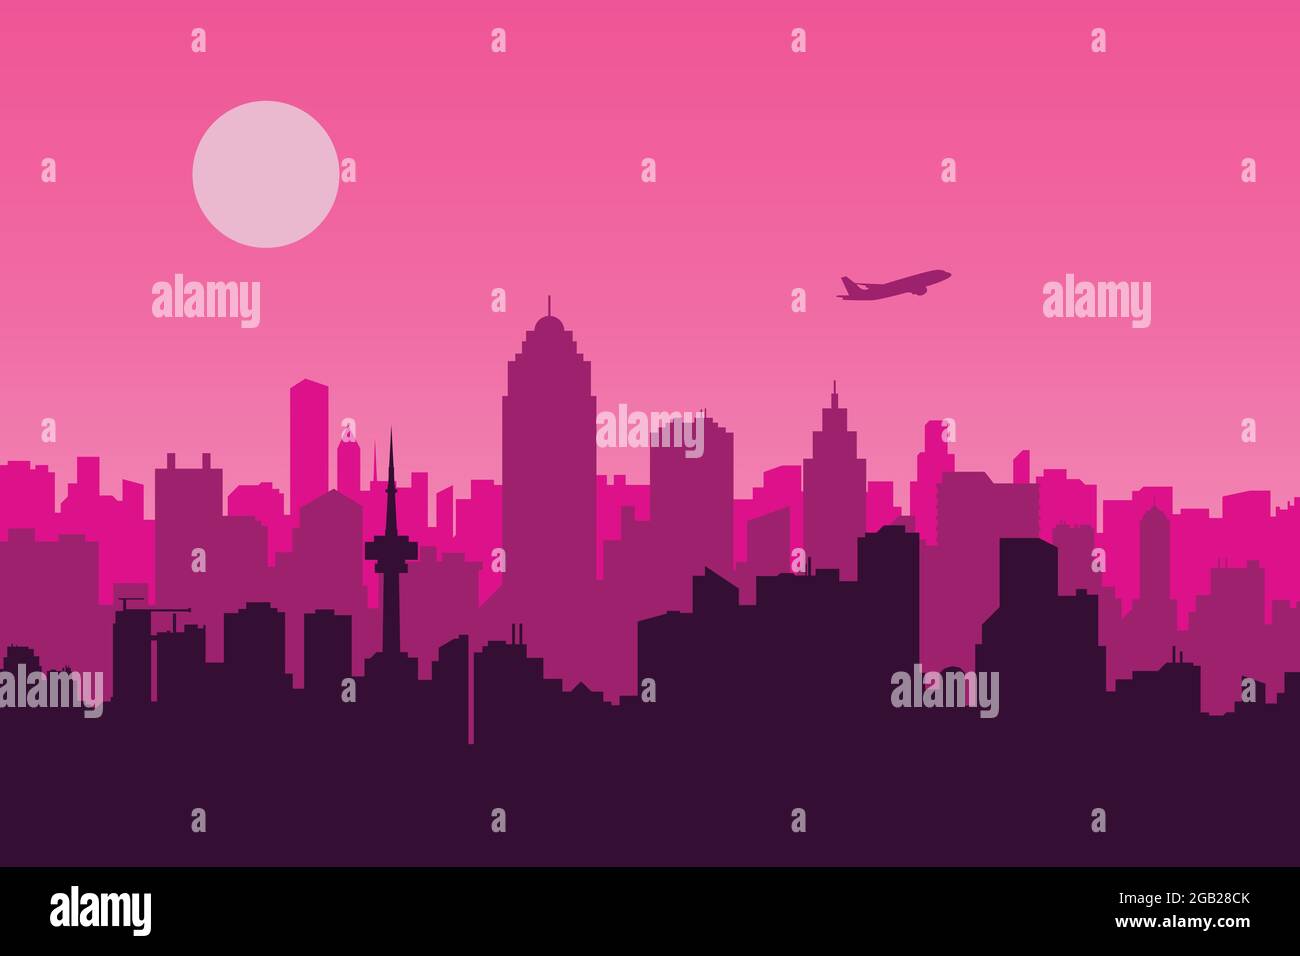 Vector illustration of an urban scene with a pink background, a metropolis, and an airplane silhouette Stock Vector